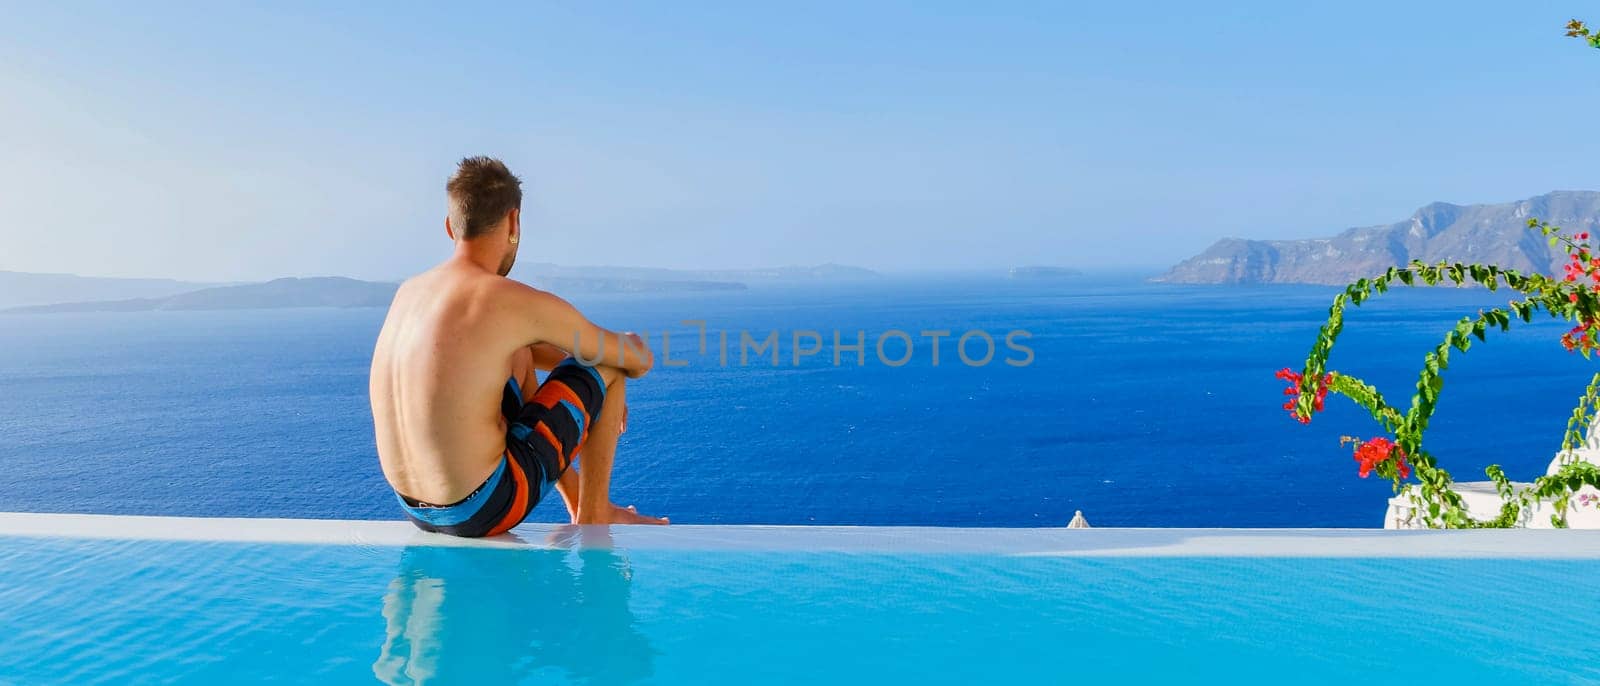 A young man in swim shorts relaxing in an infinity swimming pool during vacation at Santorini, swimming pool looking out over the Caldera ocean of Santorini, Oia Greece, Greek Island Aegean Cyclades